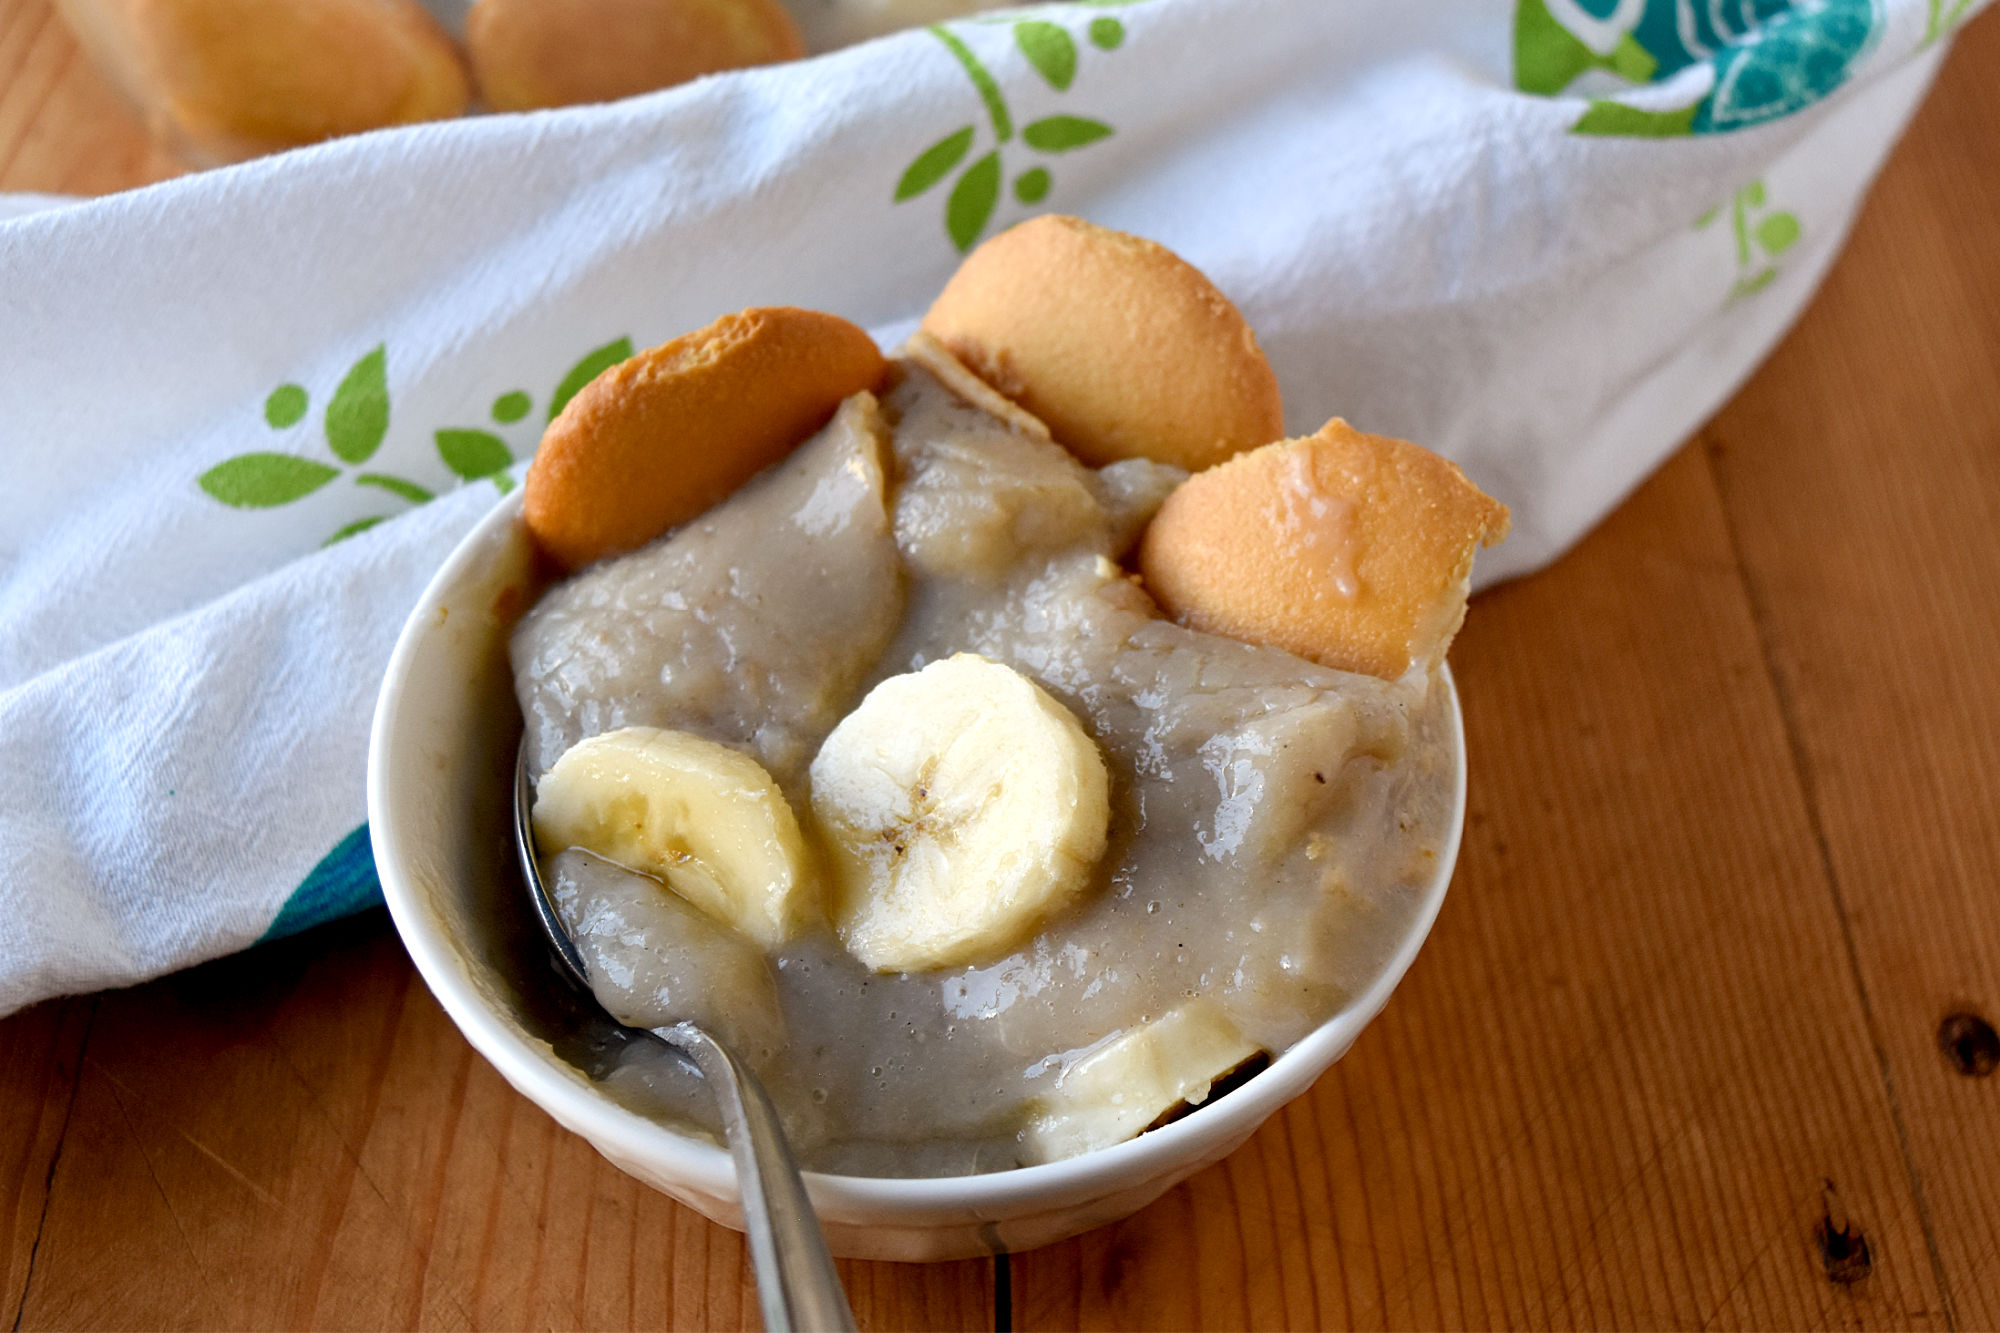 Homemade Banana Pudding has 5 ingredients and is made with ingredients you probably have on hand right now! There’s no need for pudding mix! #DairyMonth